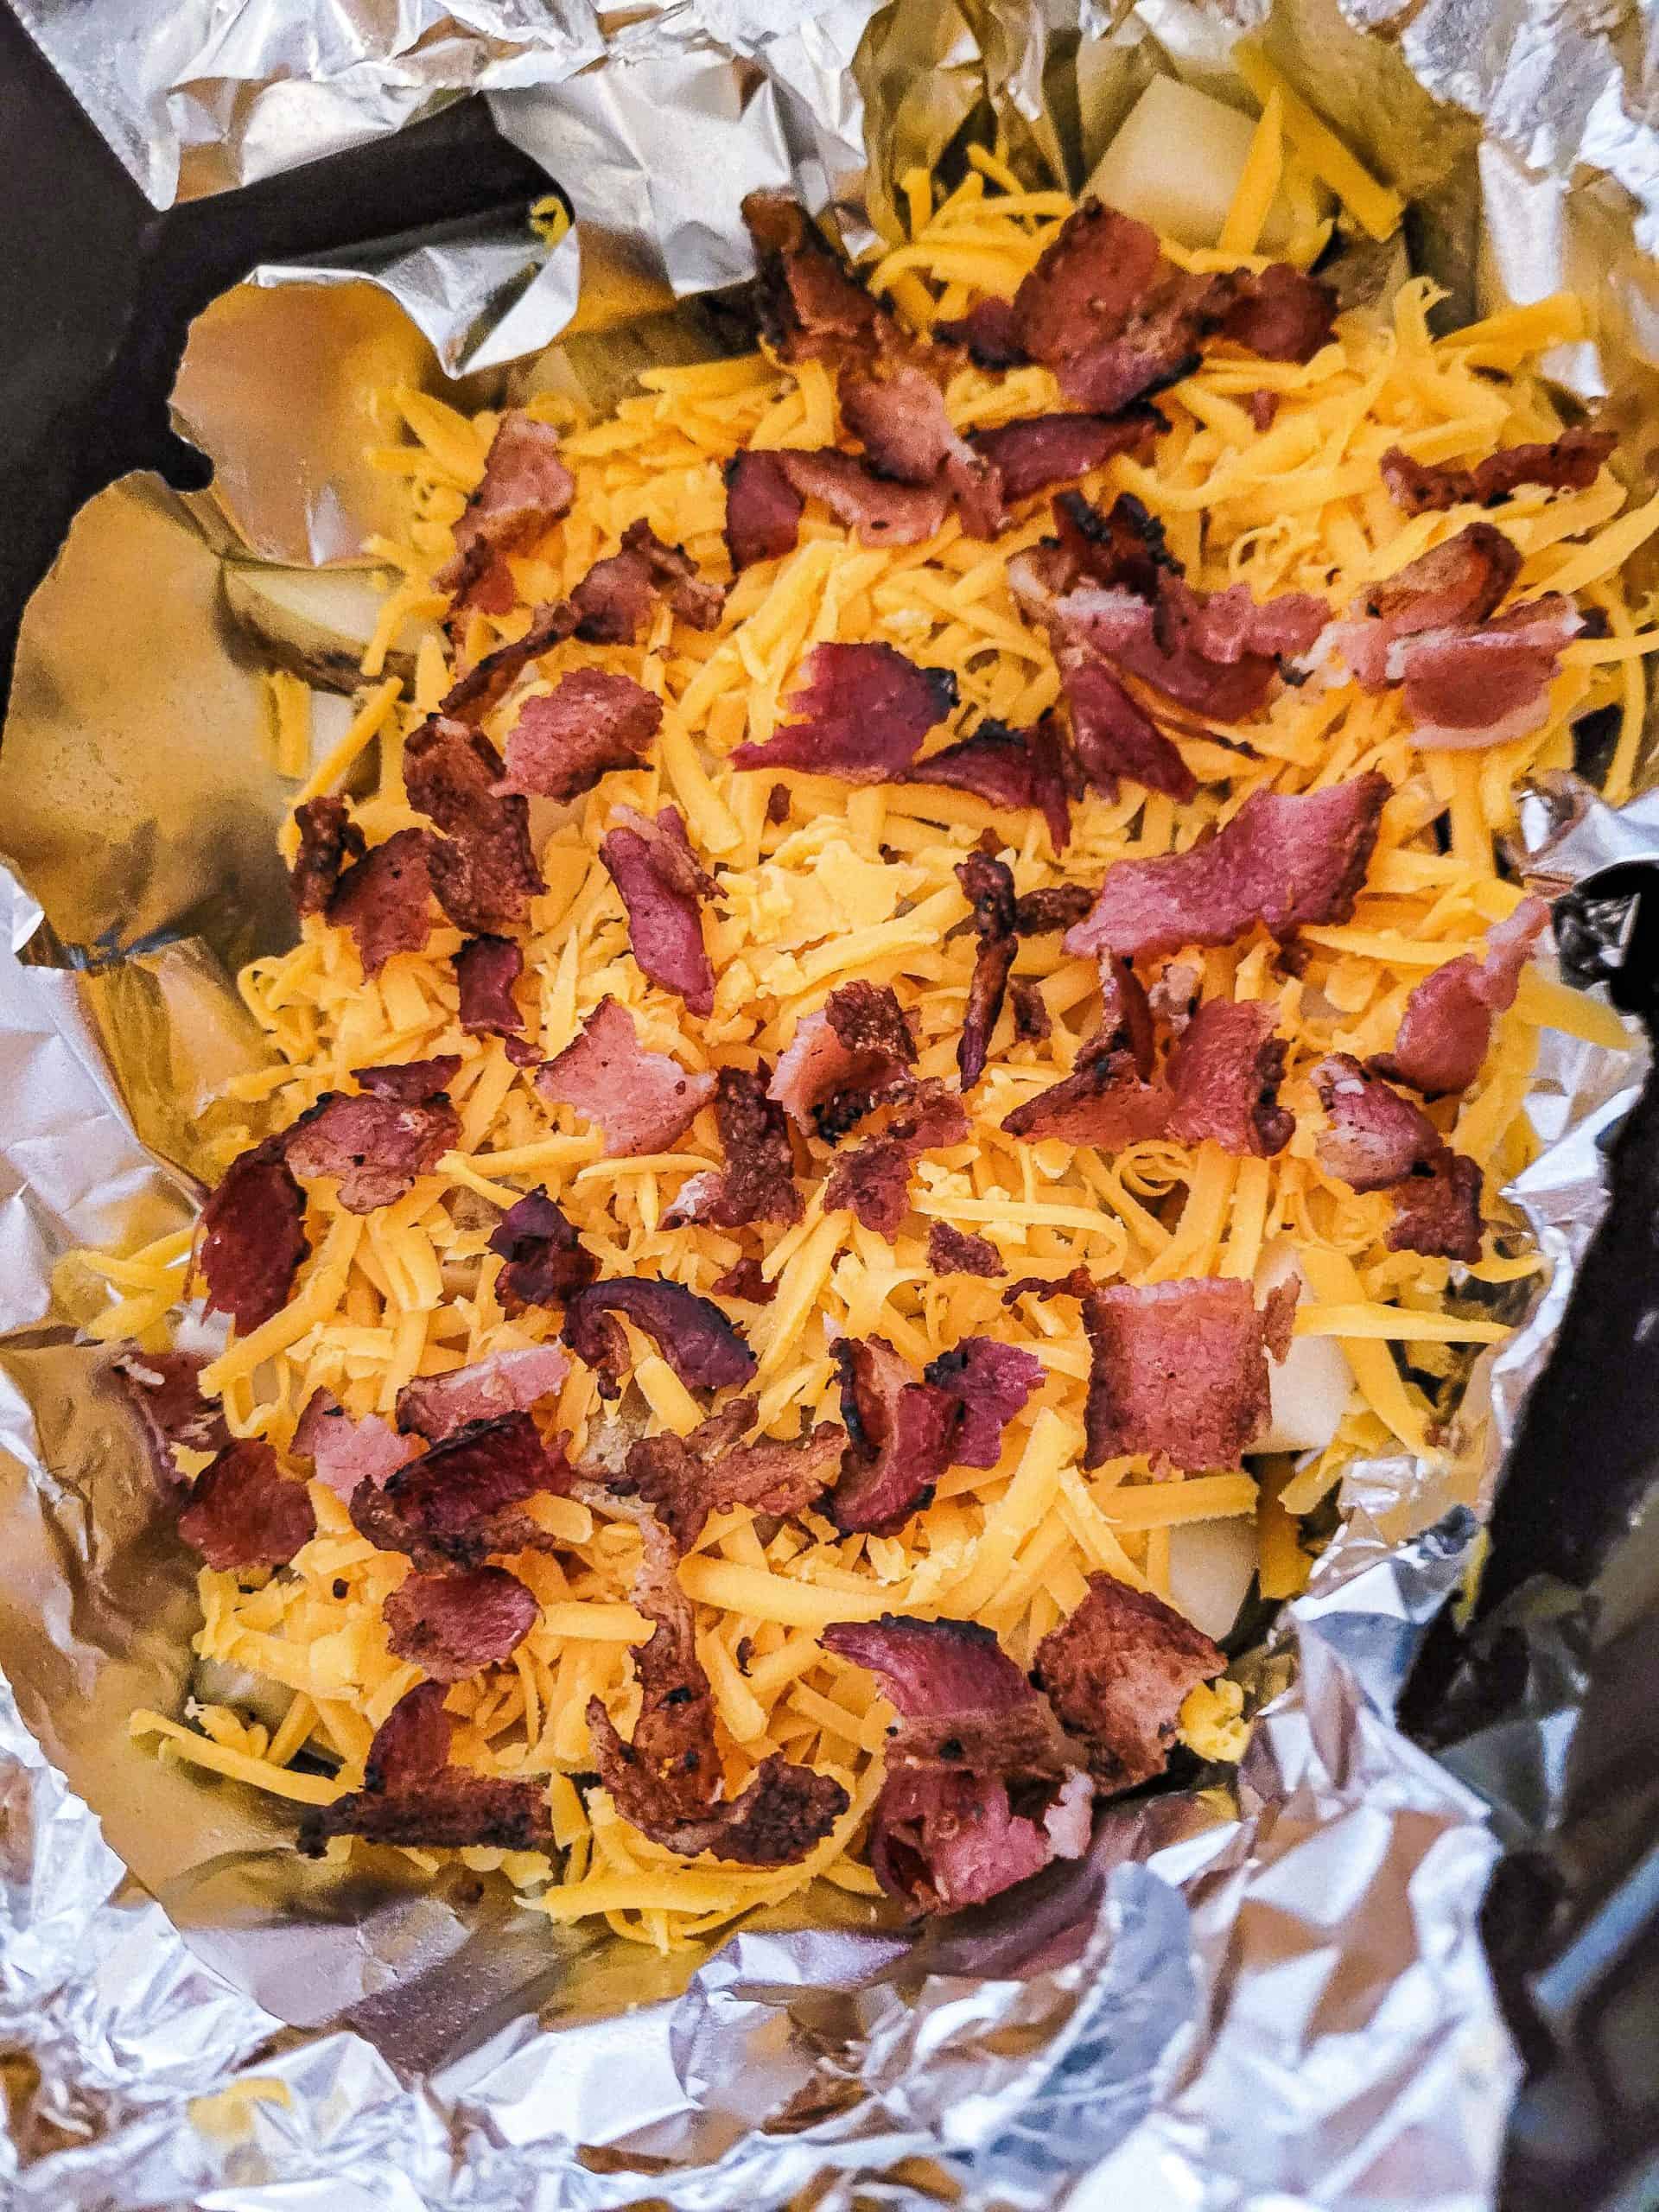 loaded potatoes with bacon